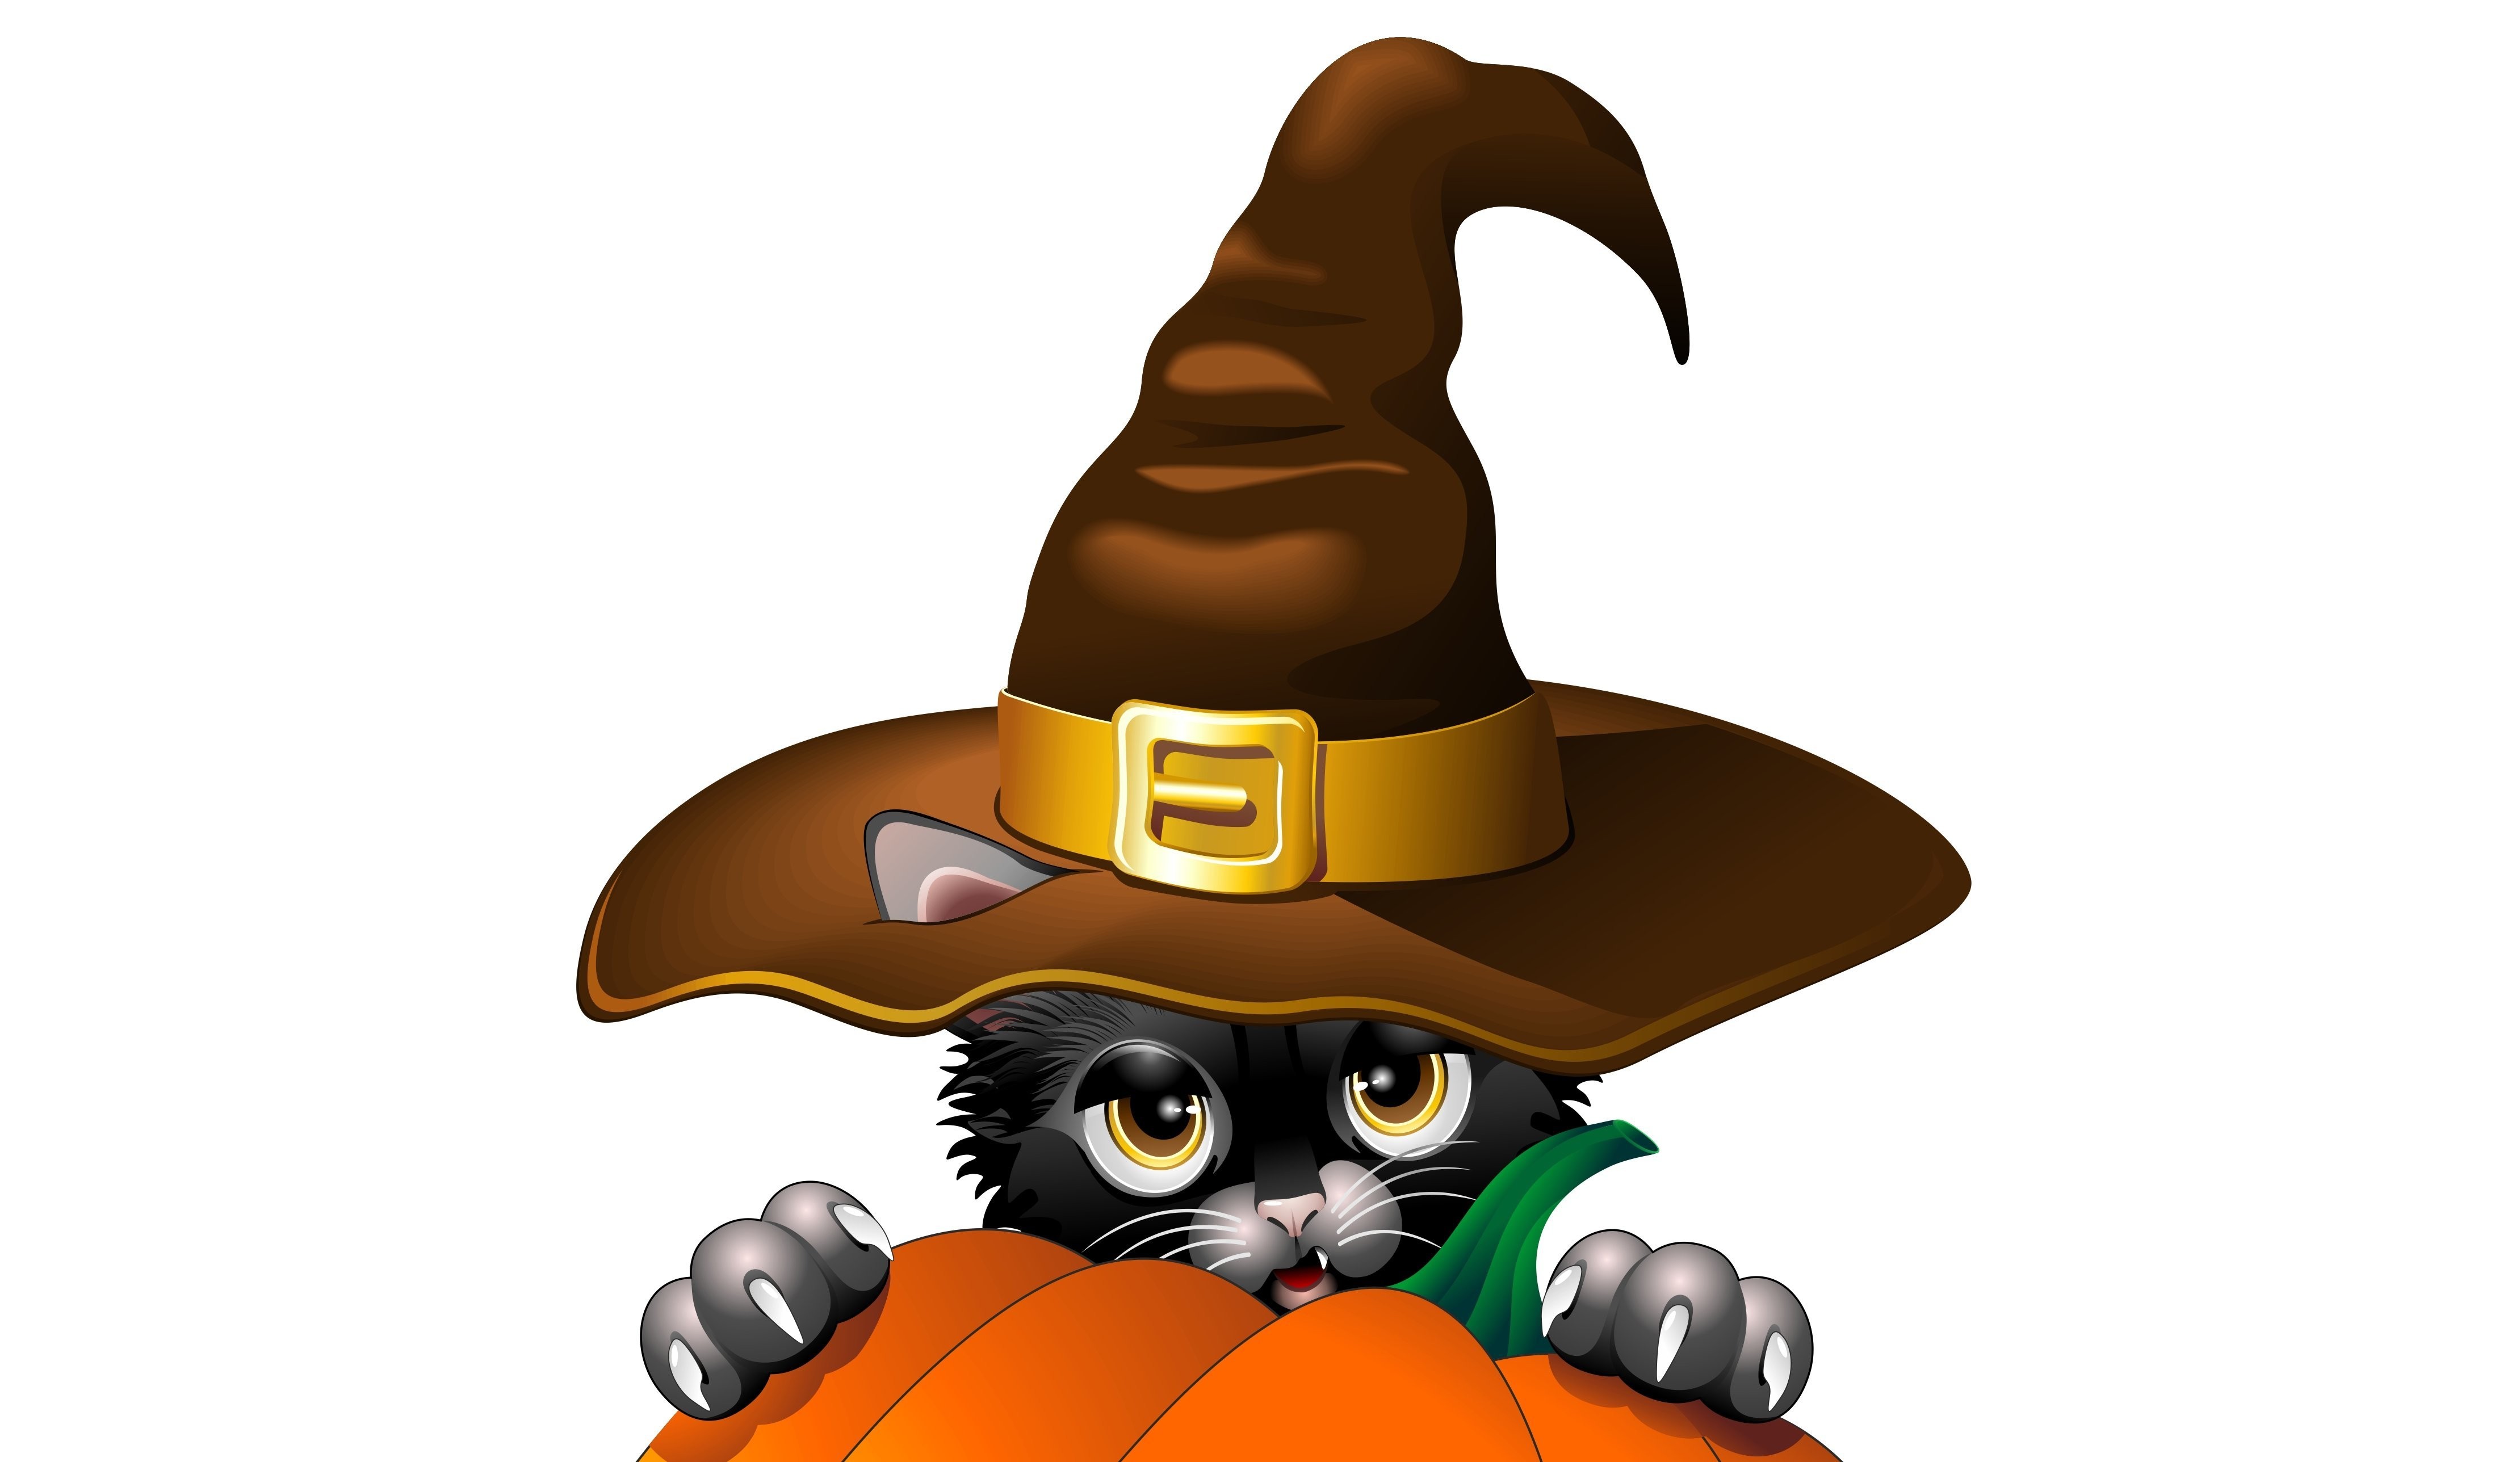 General 4439x2576 fantasy art witch hat yellow eyes white background simple background